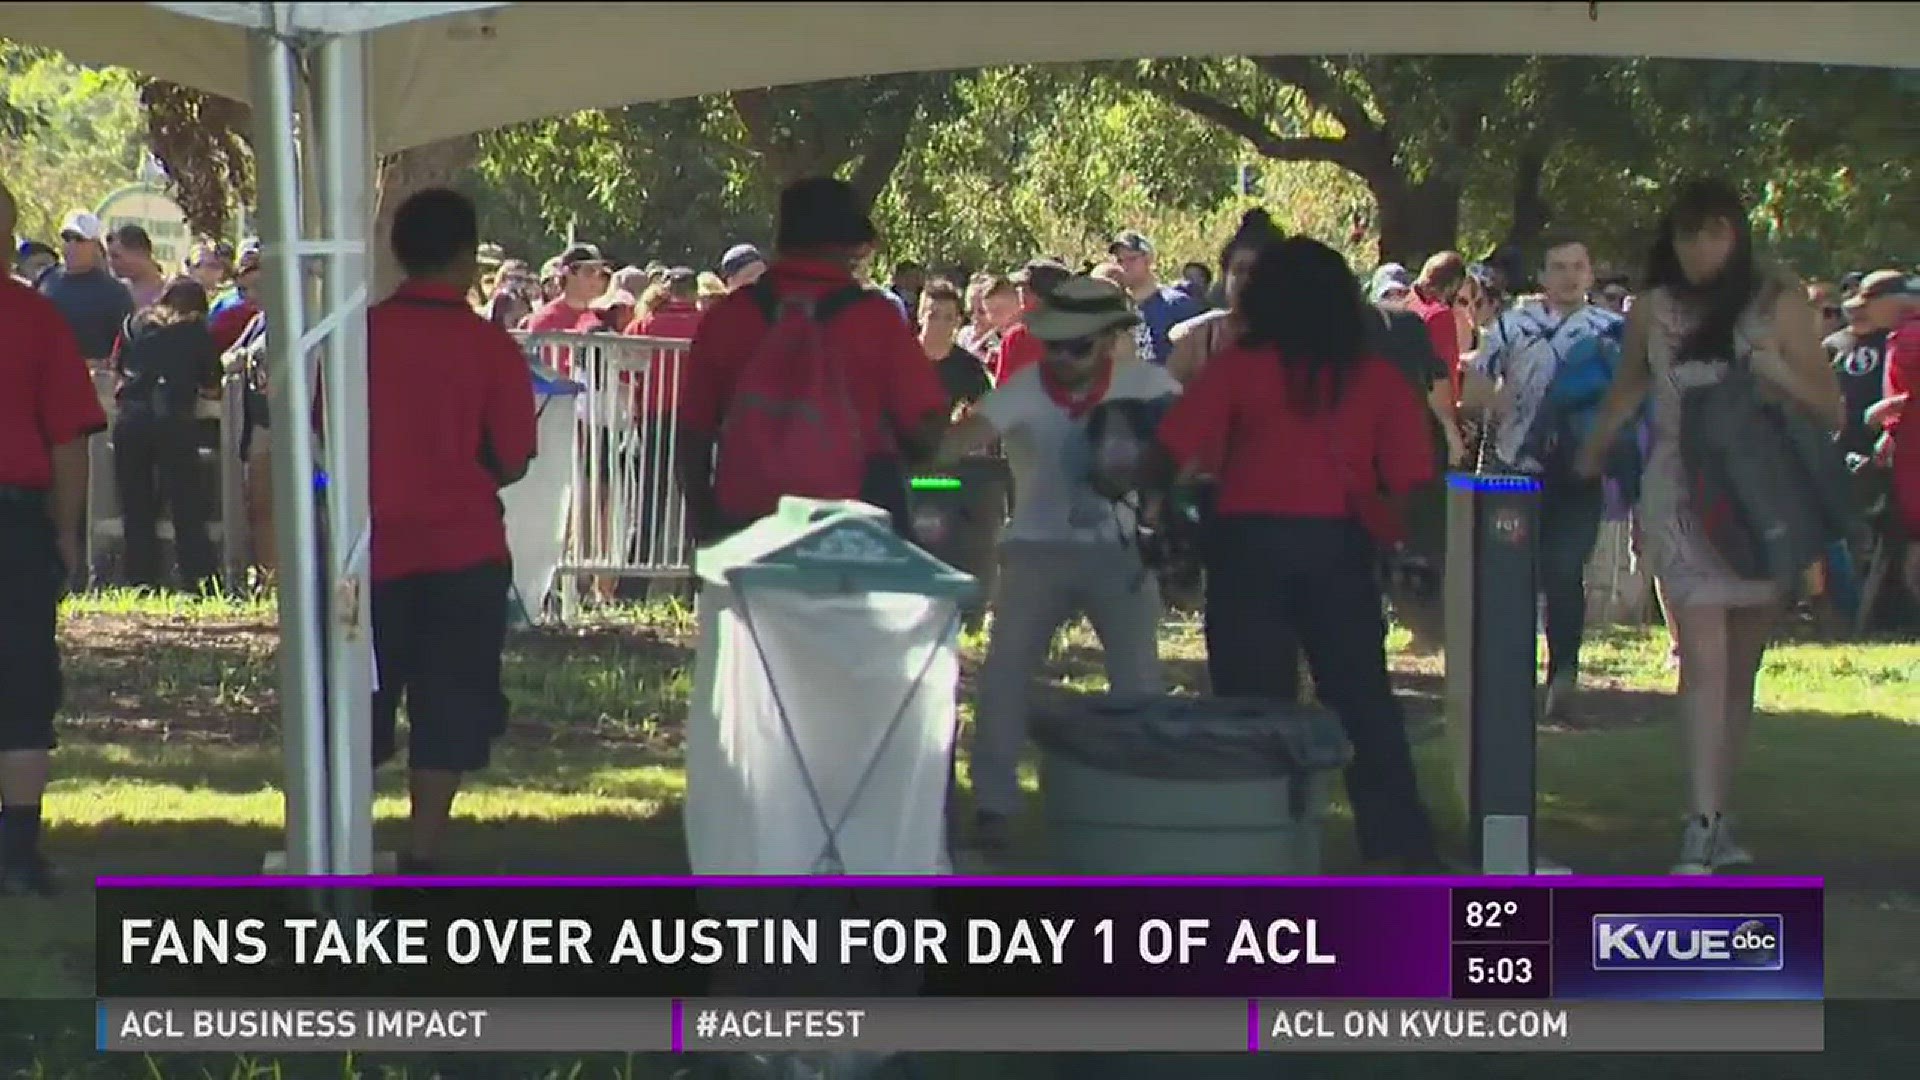 Fans take over Austin for Day 1 of ACL